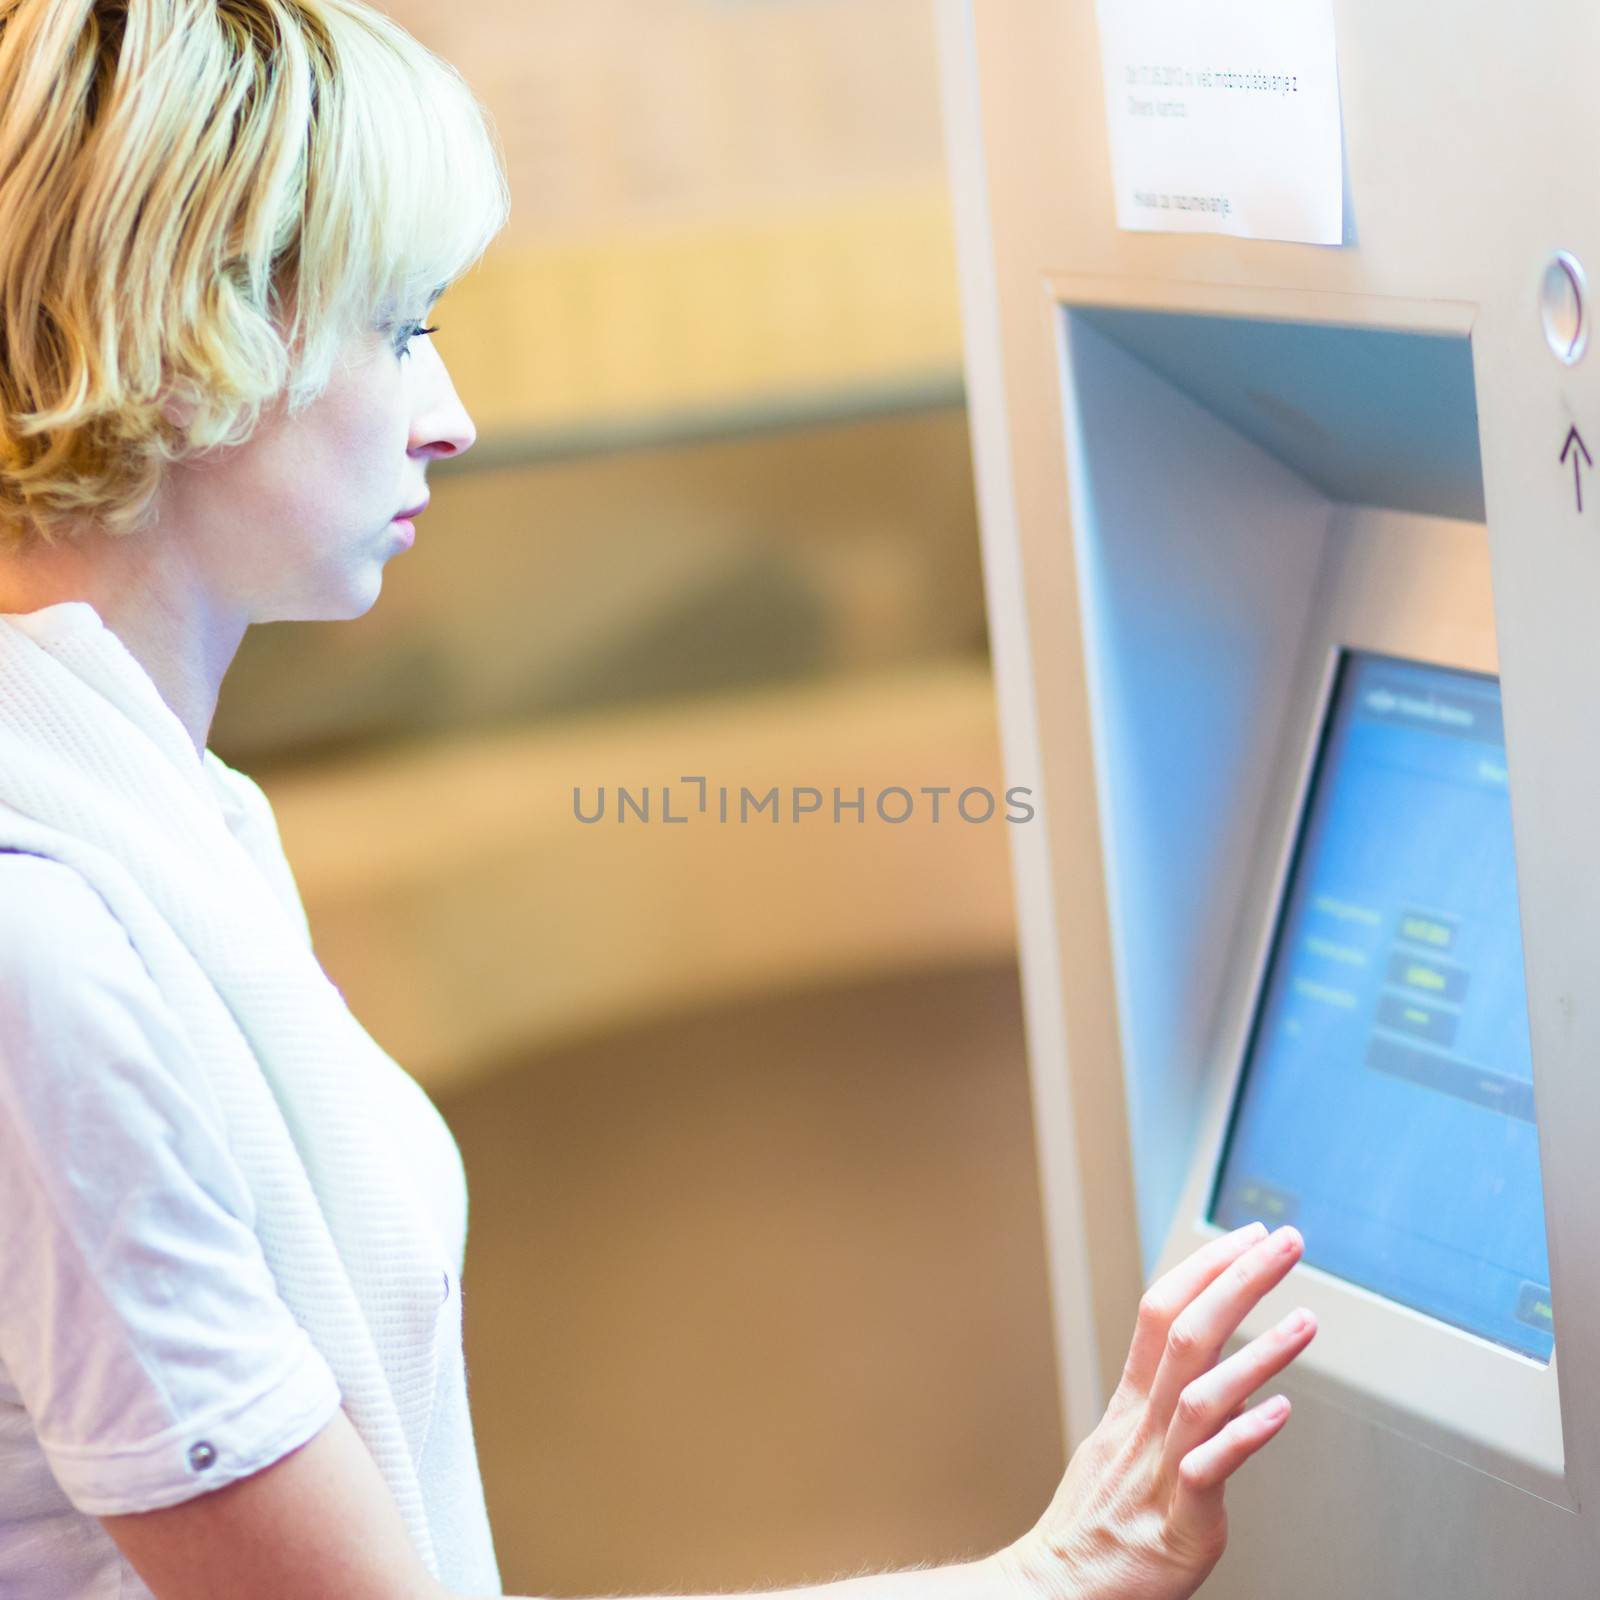 Lady buying a railway ticket at the automatic ticket vending machine with touch screen.